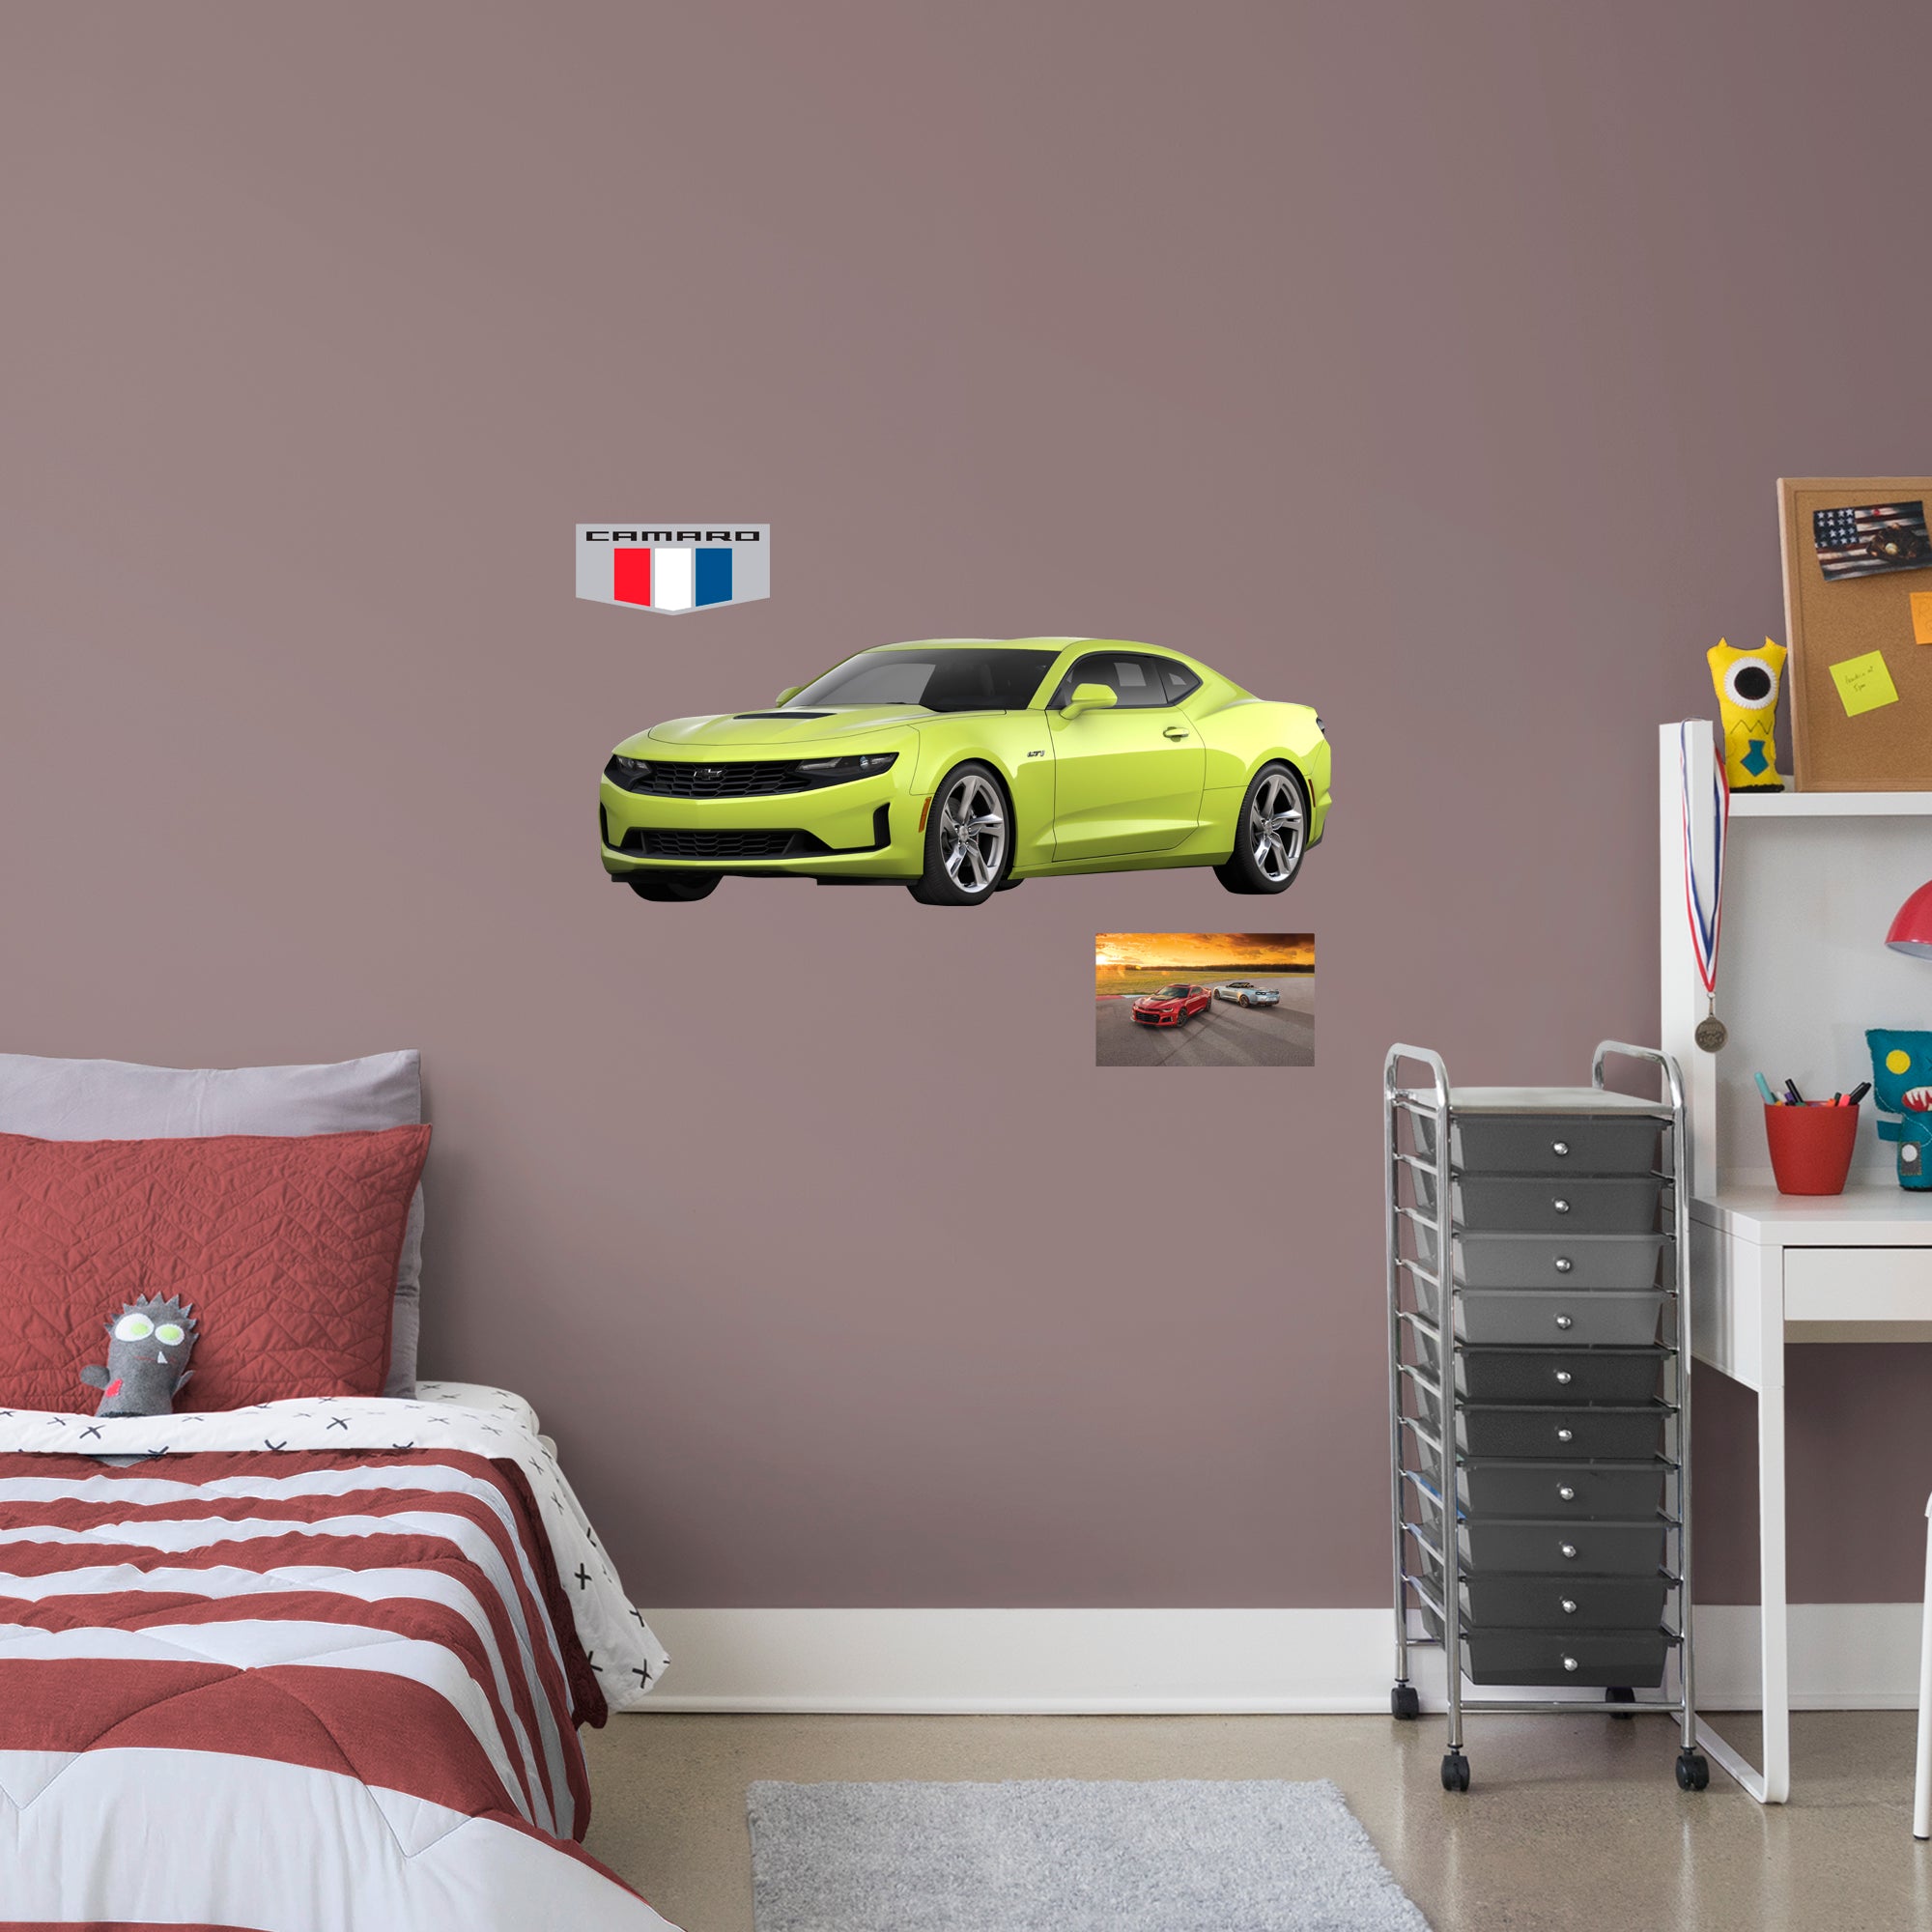 Chevrolet Yellow Camaro: Officially Licensed GM Removable Wall Decal Giant + 2 Decals by Fathead | Vinyl